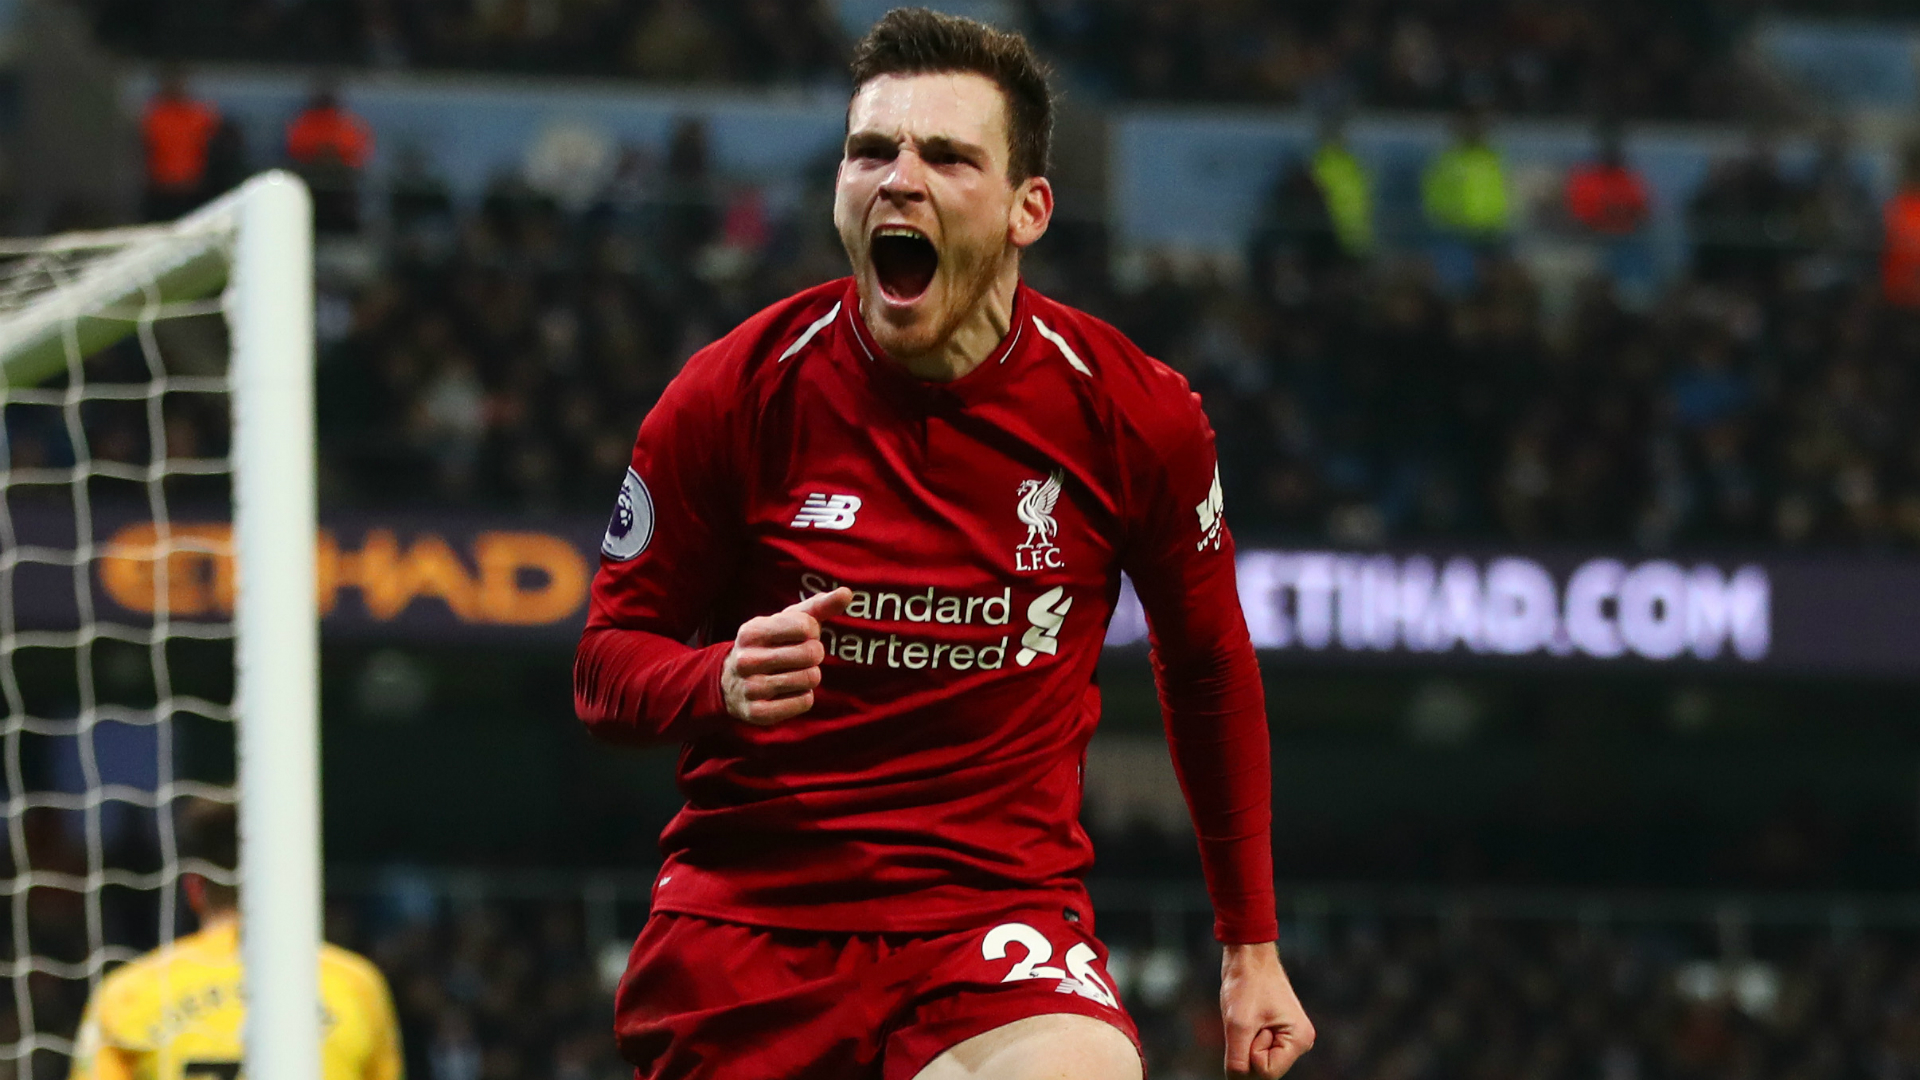 He is one of the Premier League's most impressive defenders but Liverpool's Andy Robertson says his goal is to get even better.